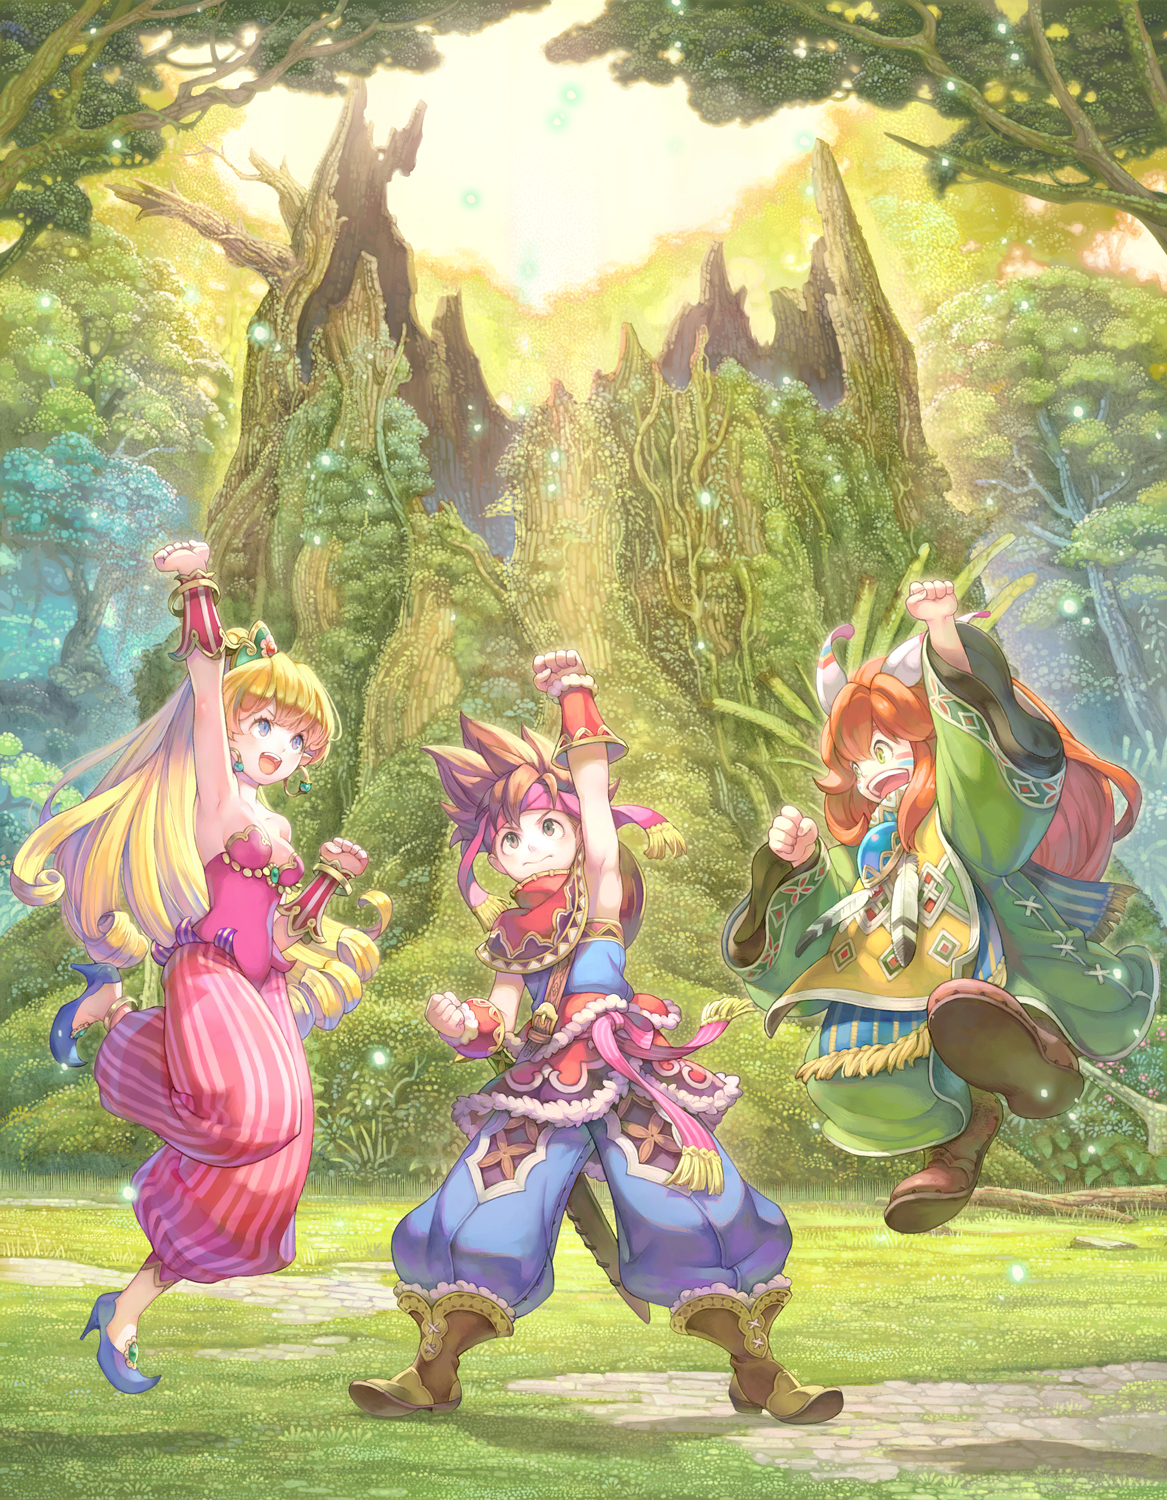 There Are Far More Images Available For Secret Of Mana, - Secret Of Mana , HD Wallpaper & Backgrounds